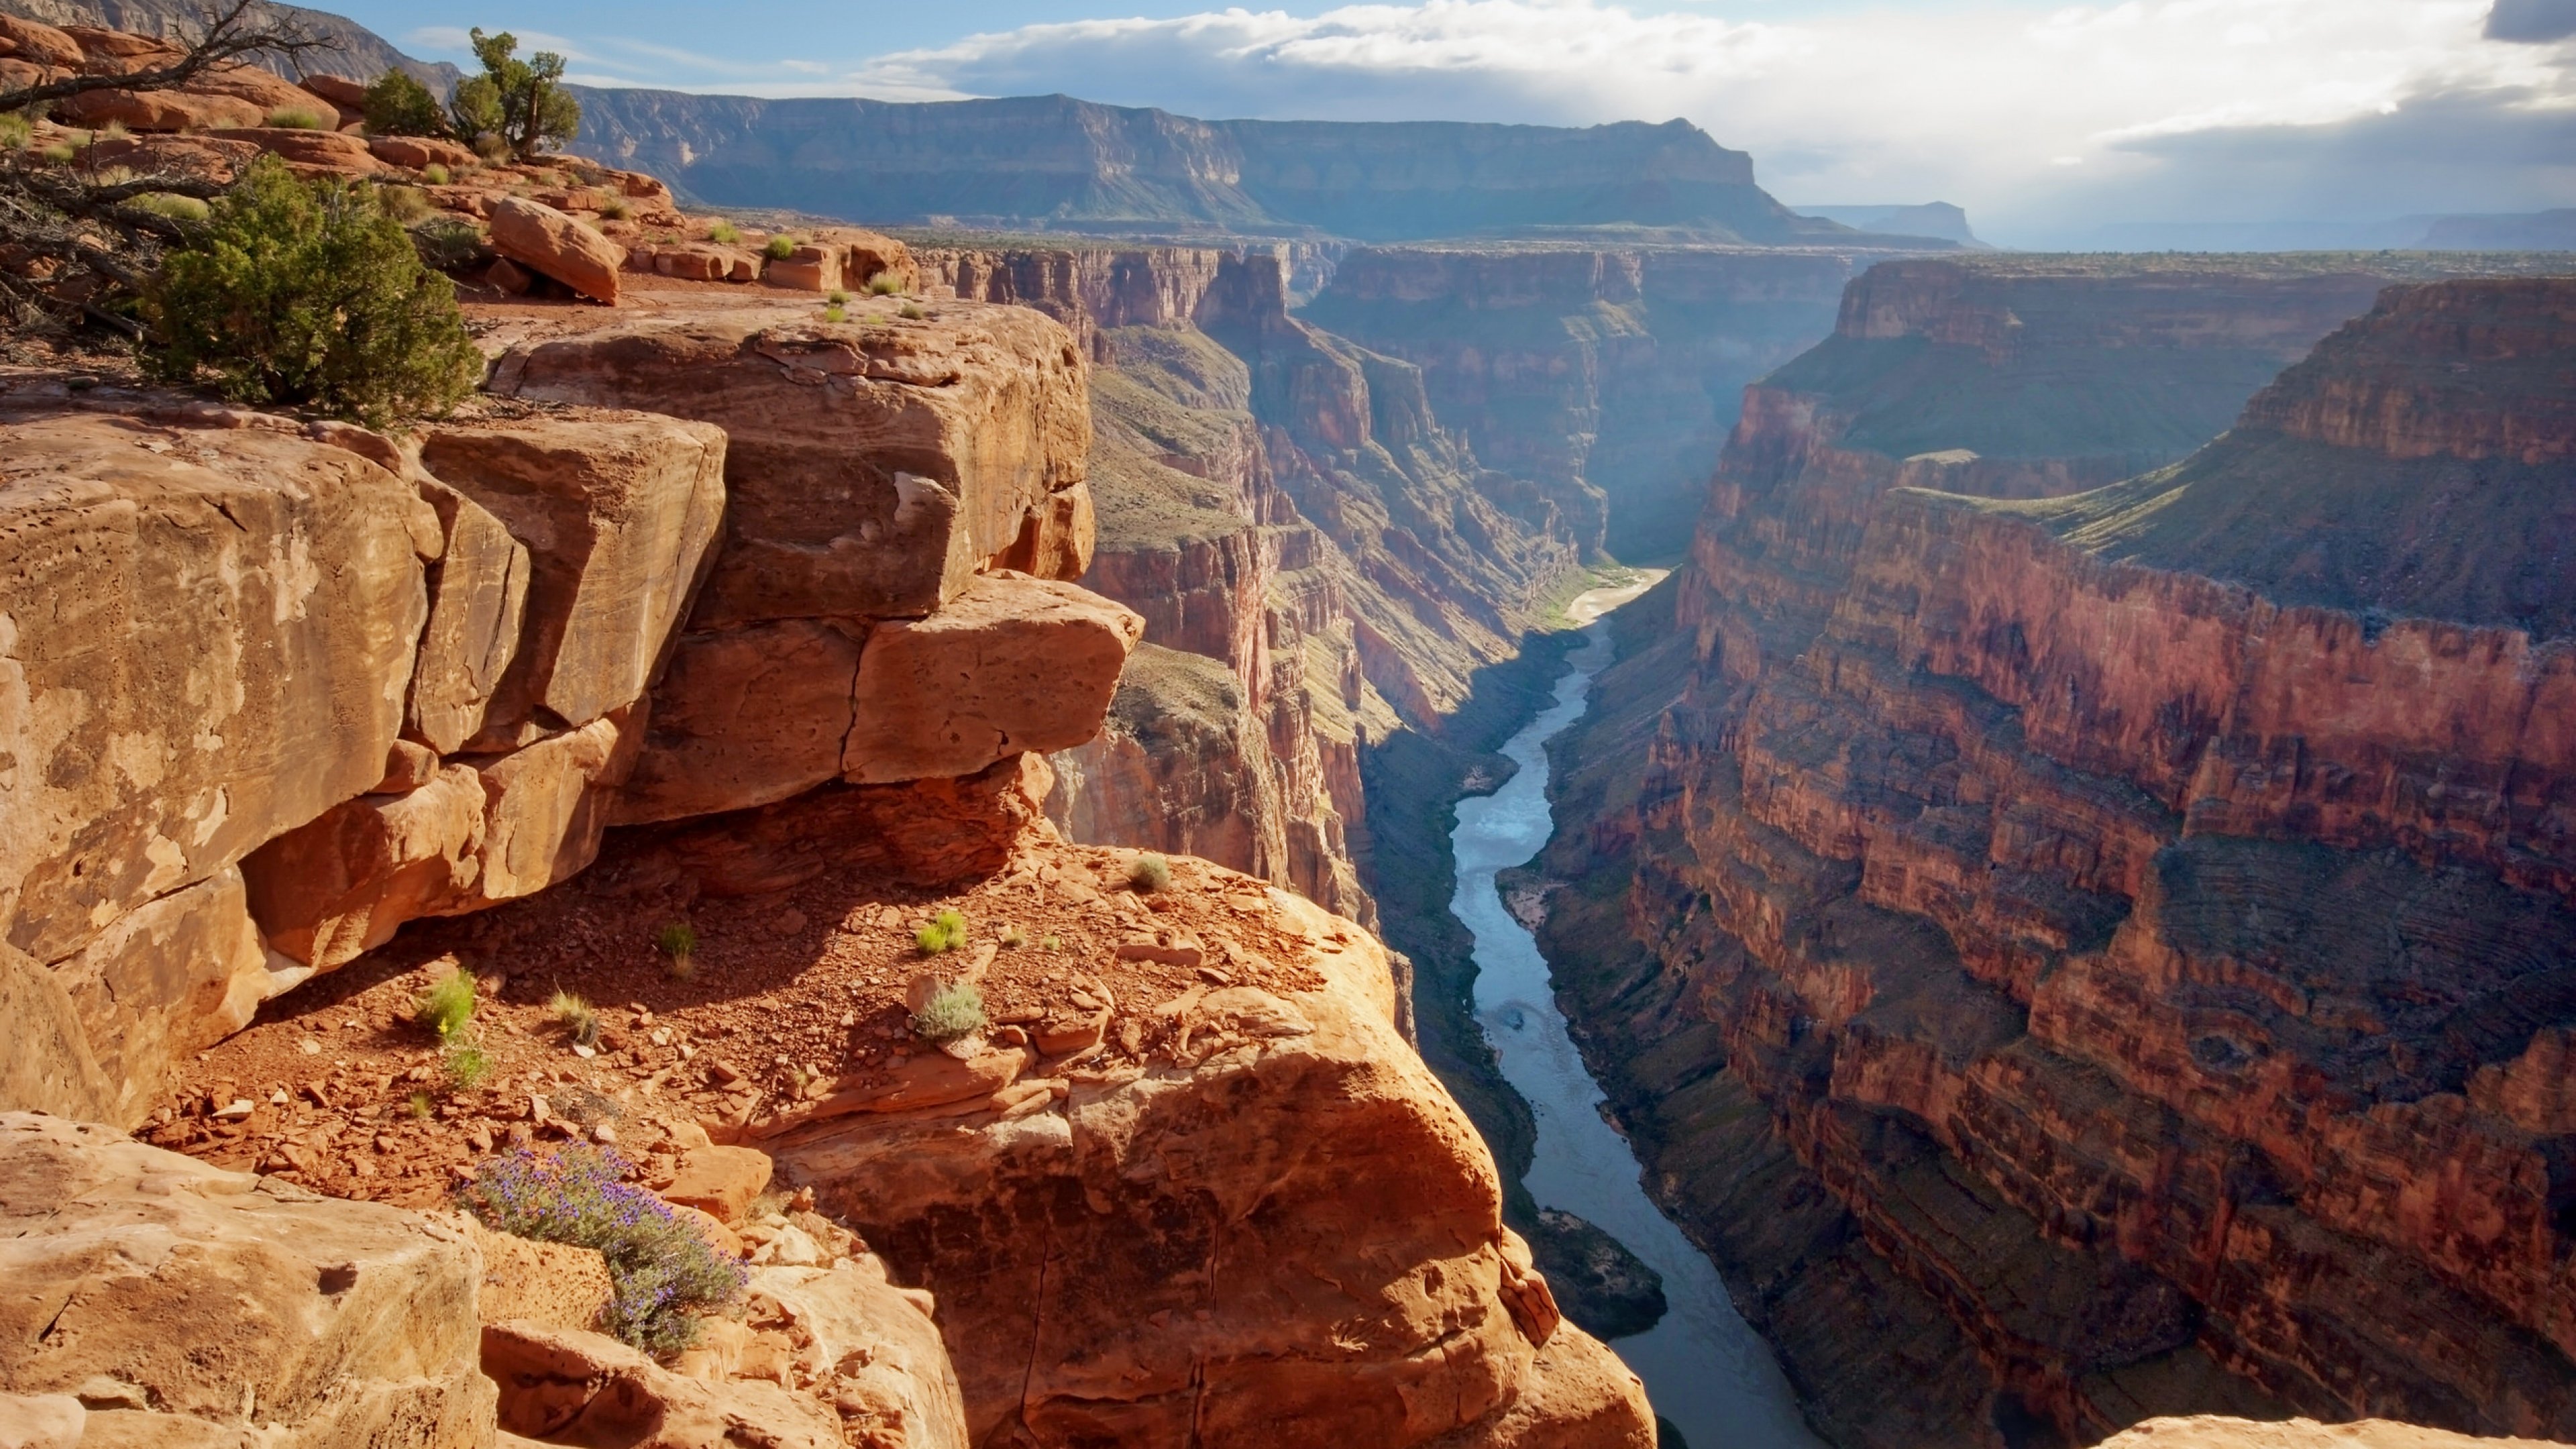 8 Facts About the Grand Canyon You Never Knew | National Park Foundation